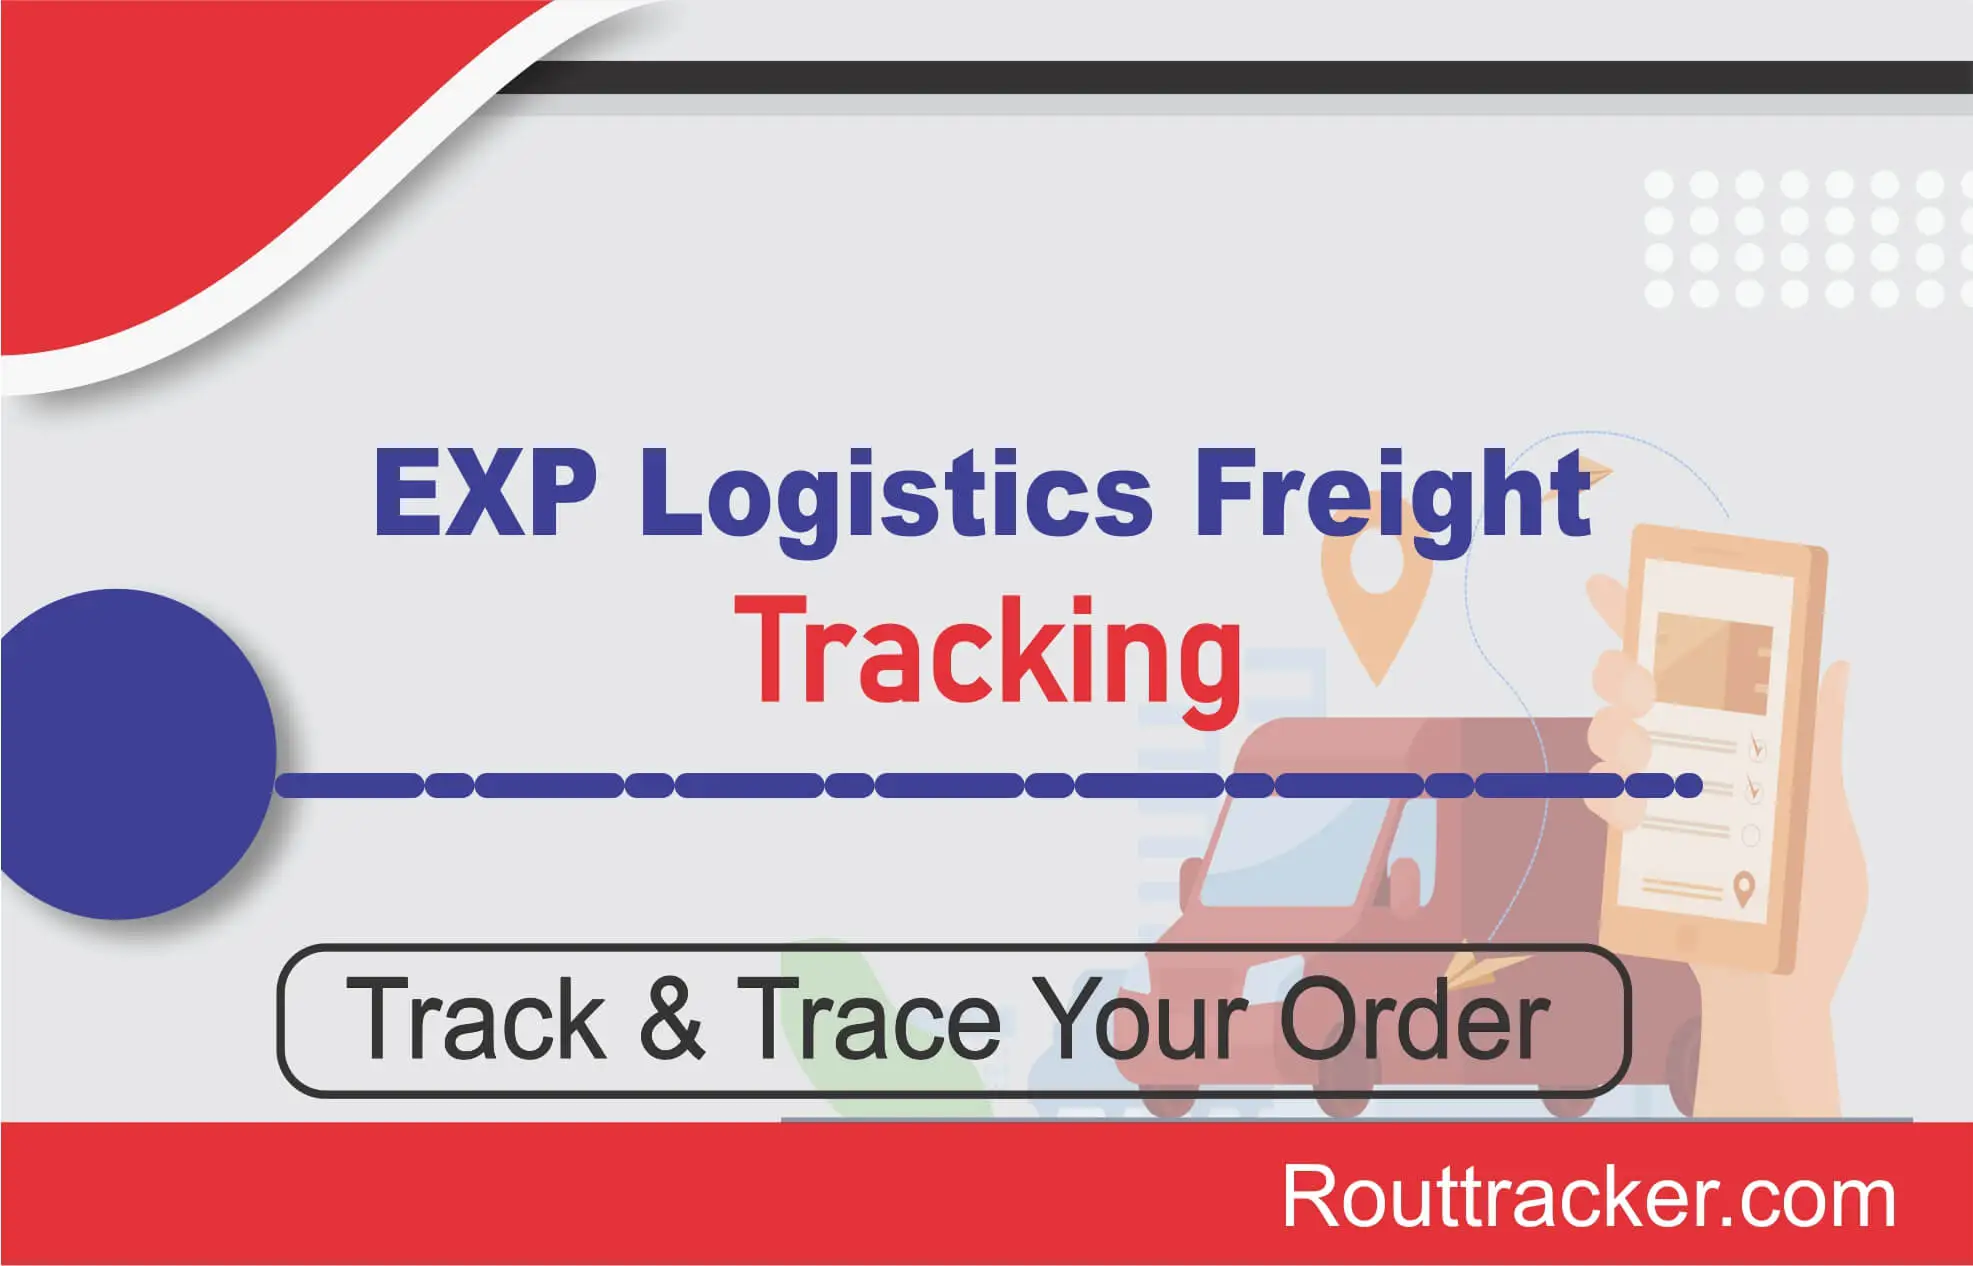 EXP Logistics Freight Tracking